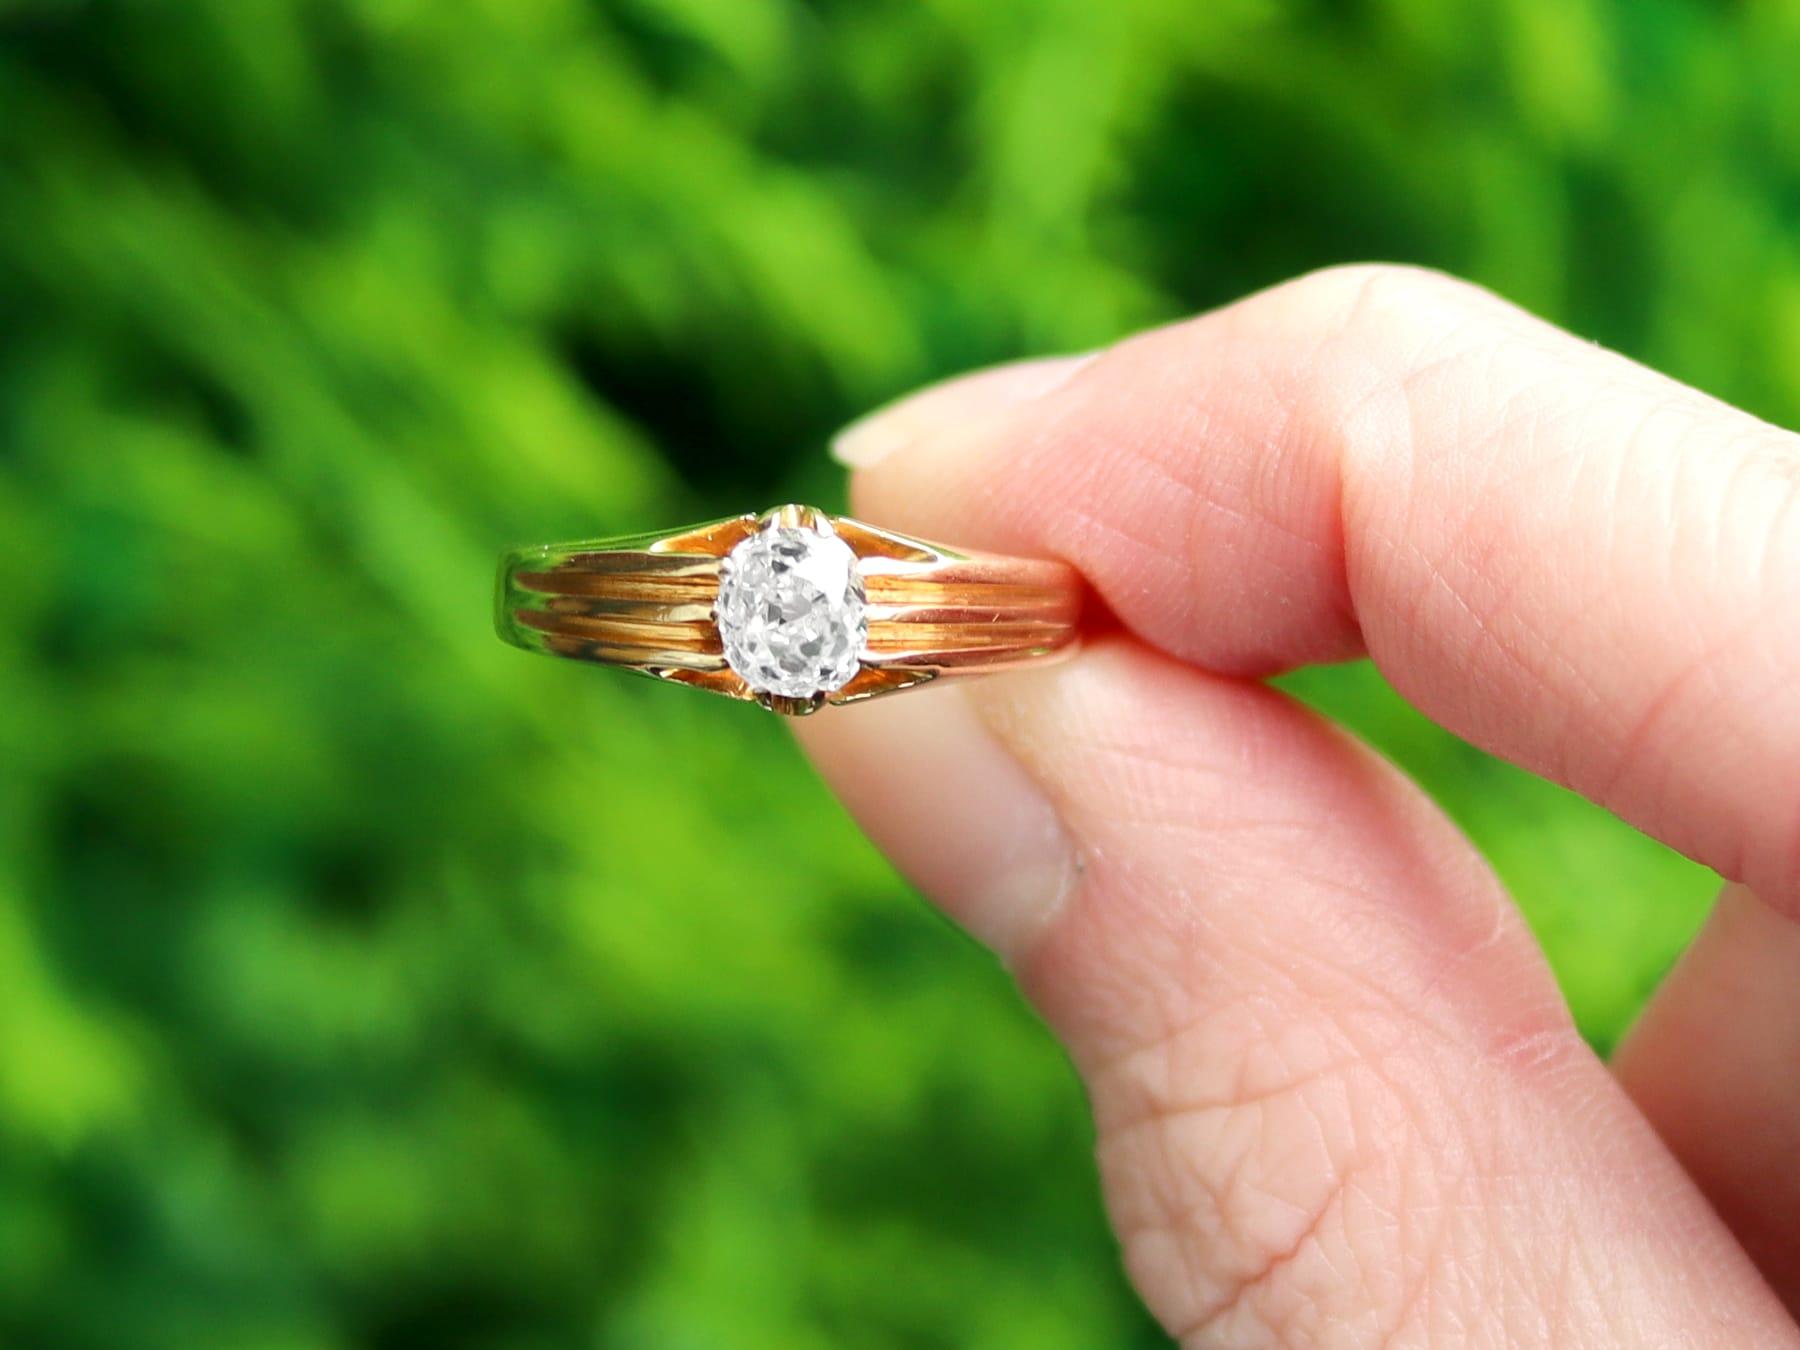 A fine and impressive antique 0.70 carat old European round cut diamond, 18k yellow gold solitaire ring; an addition to our antique jewelry and estate jewelry collections.

This impressive antique diamond and yellow gold solitaire ring has been